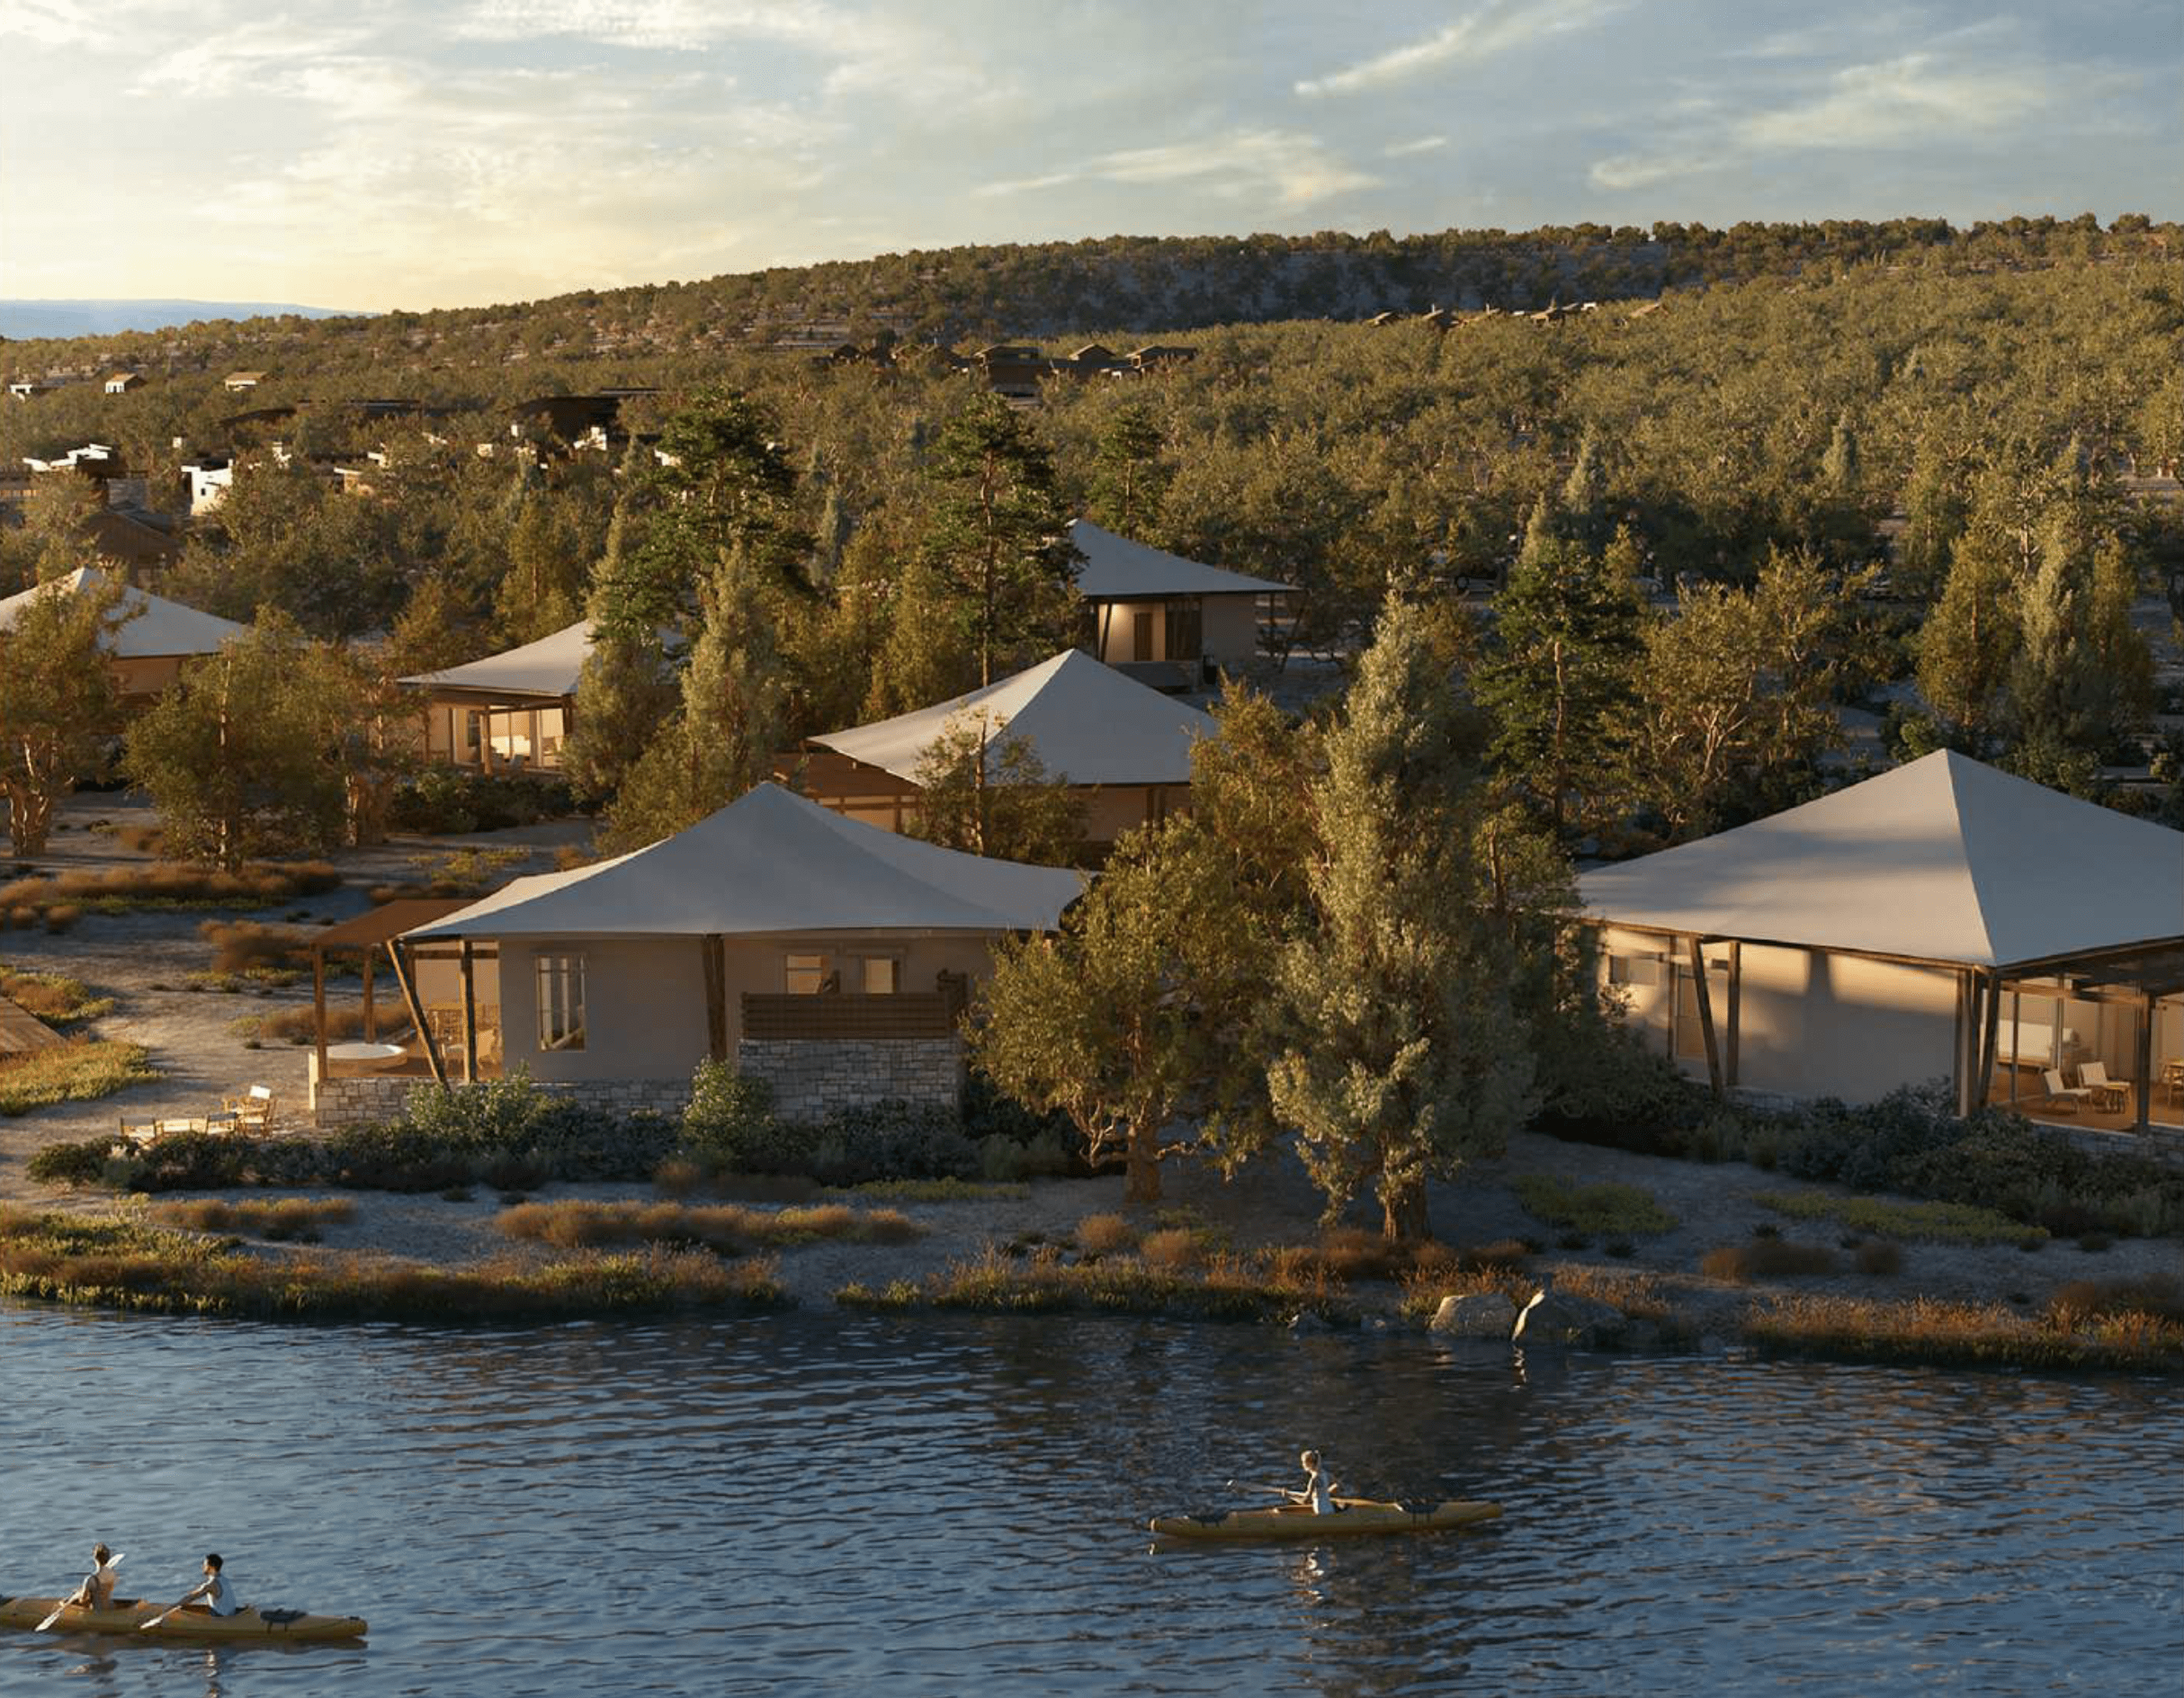 Tent cabins situated alongside a picturesque lake.